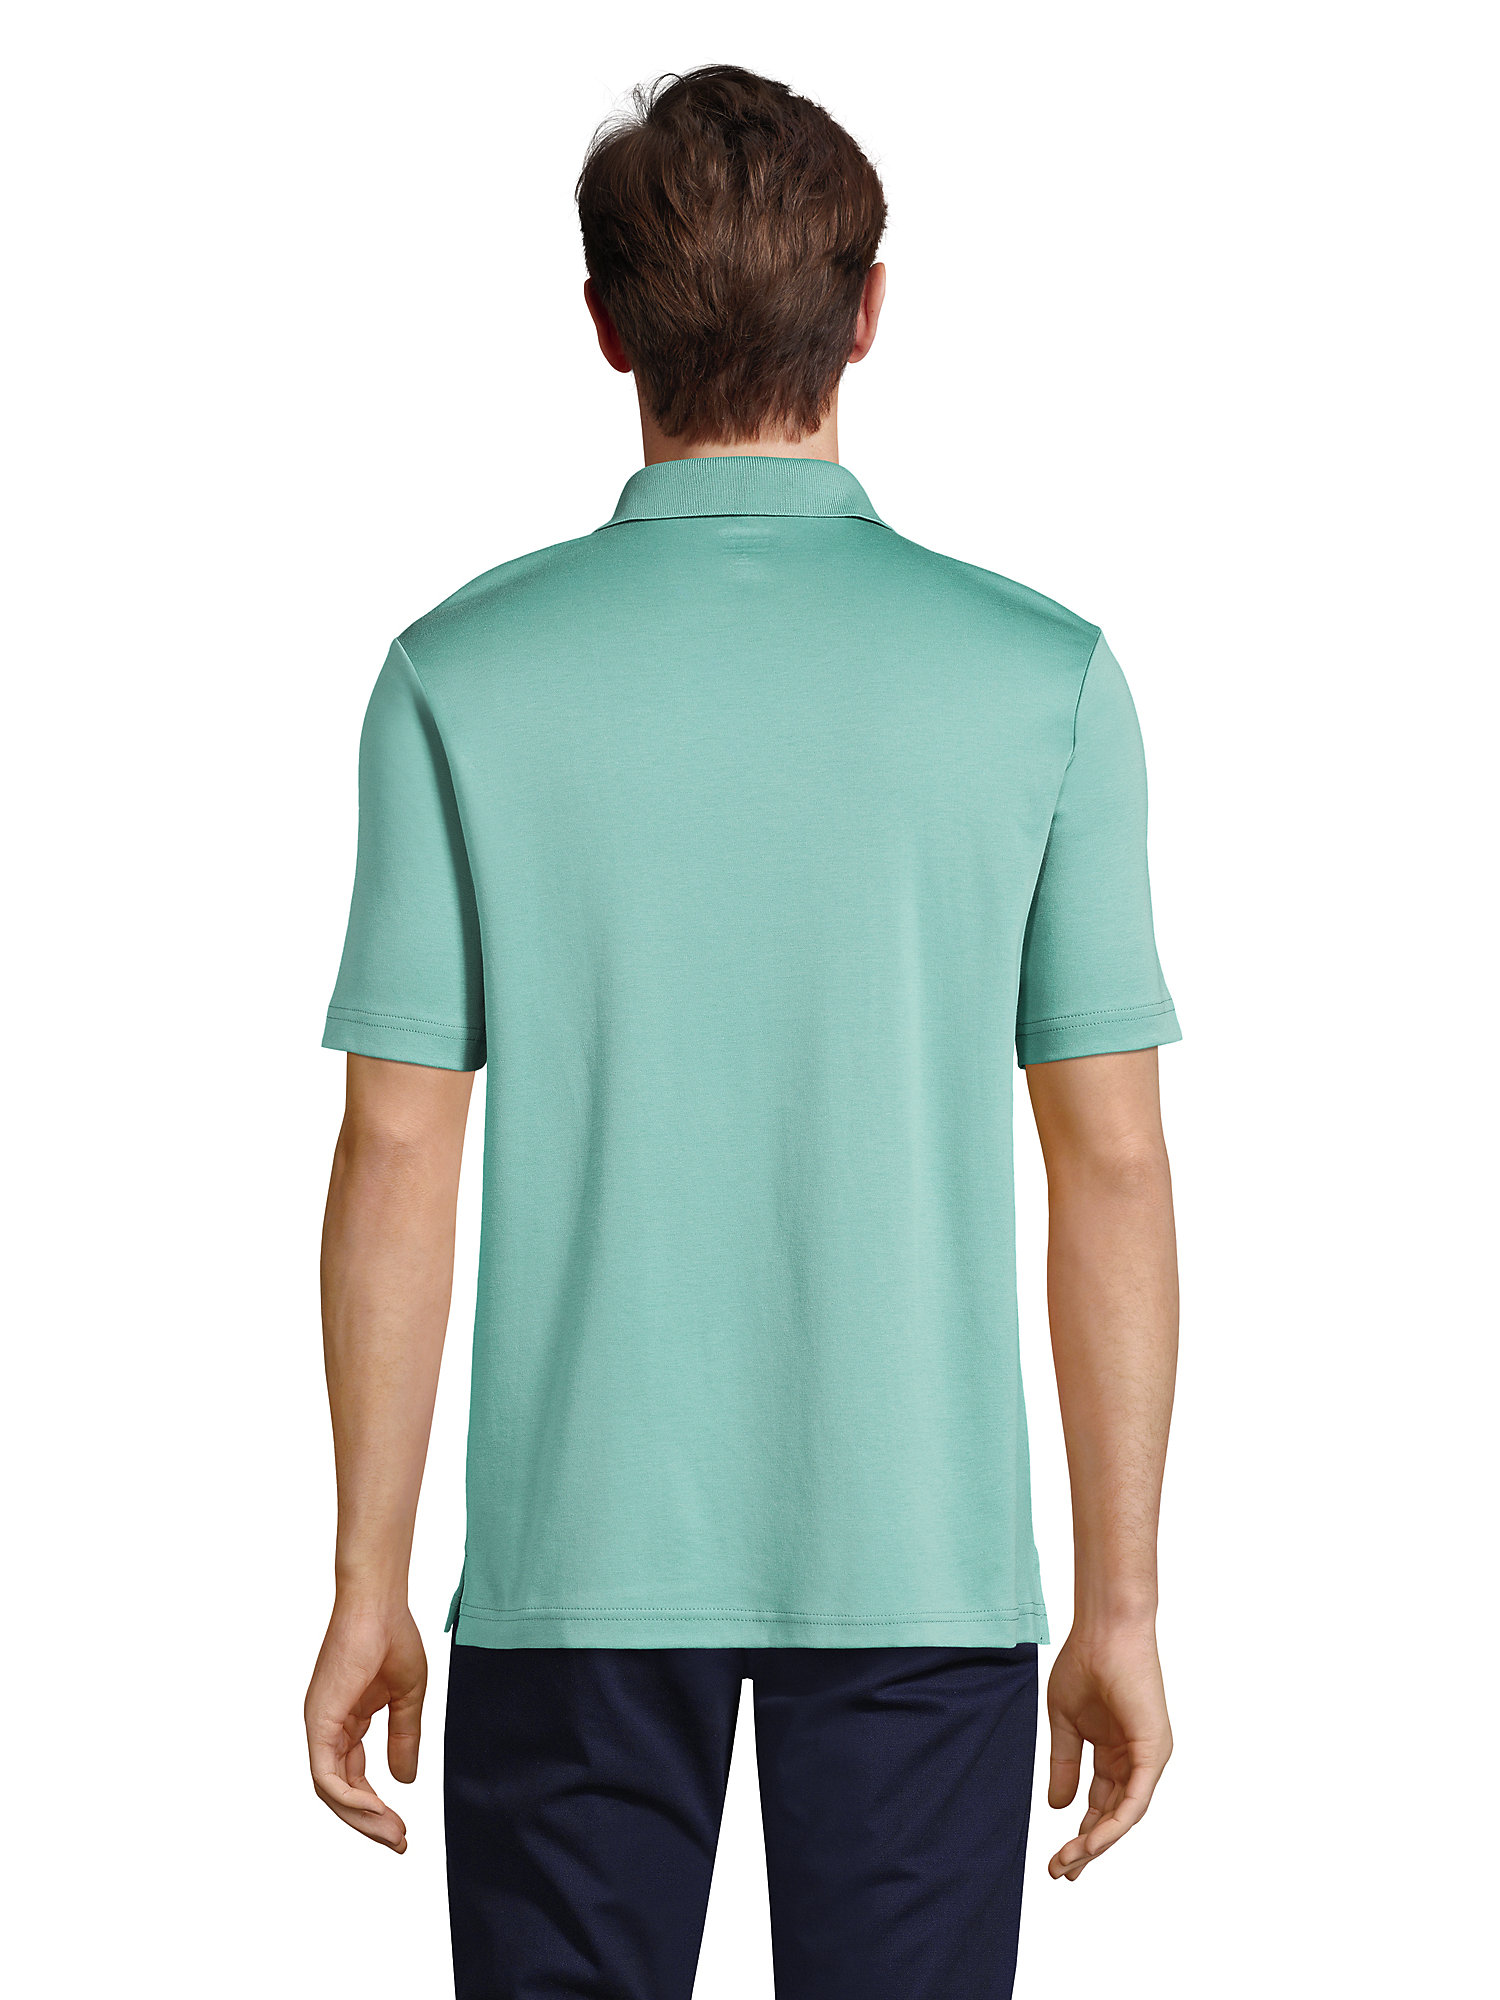 Lands' End Men's Tall Short Sleeve Super Soft Supima Polo Shirt with Pocket 